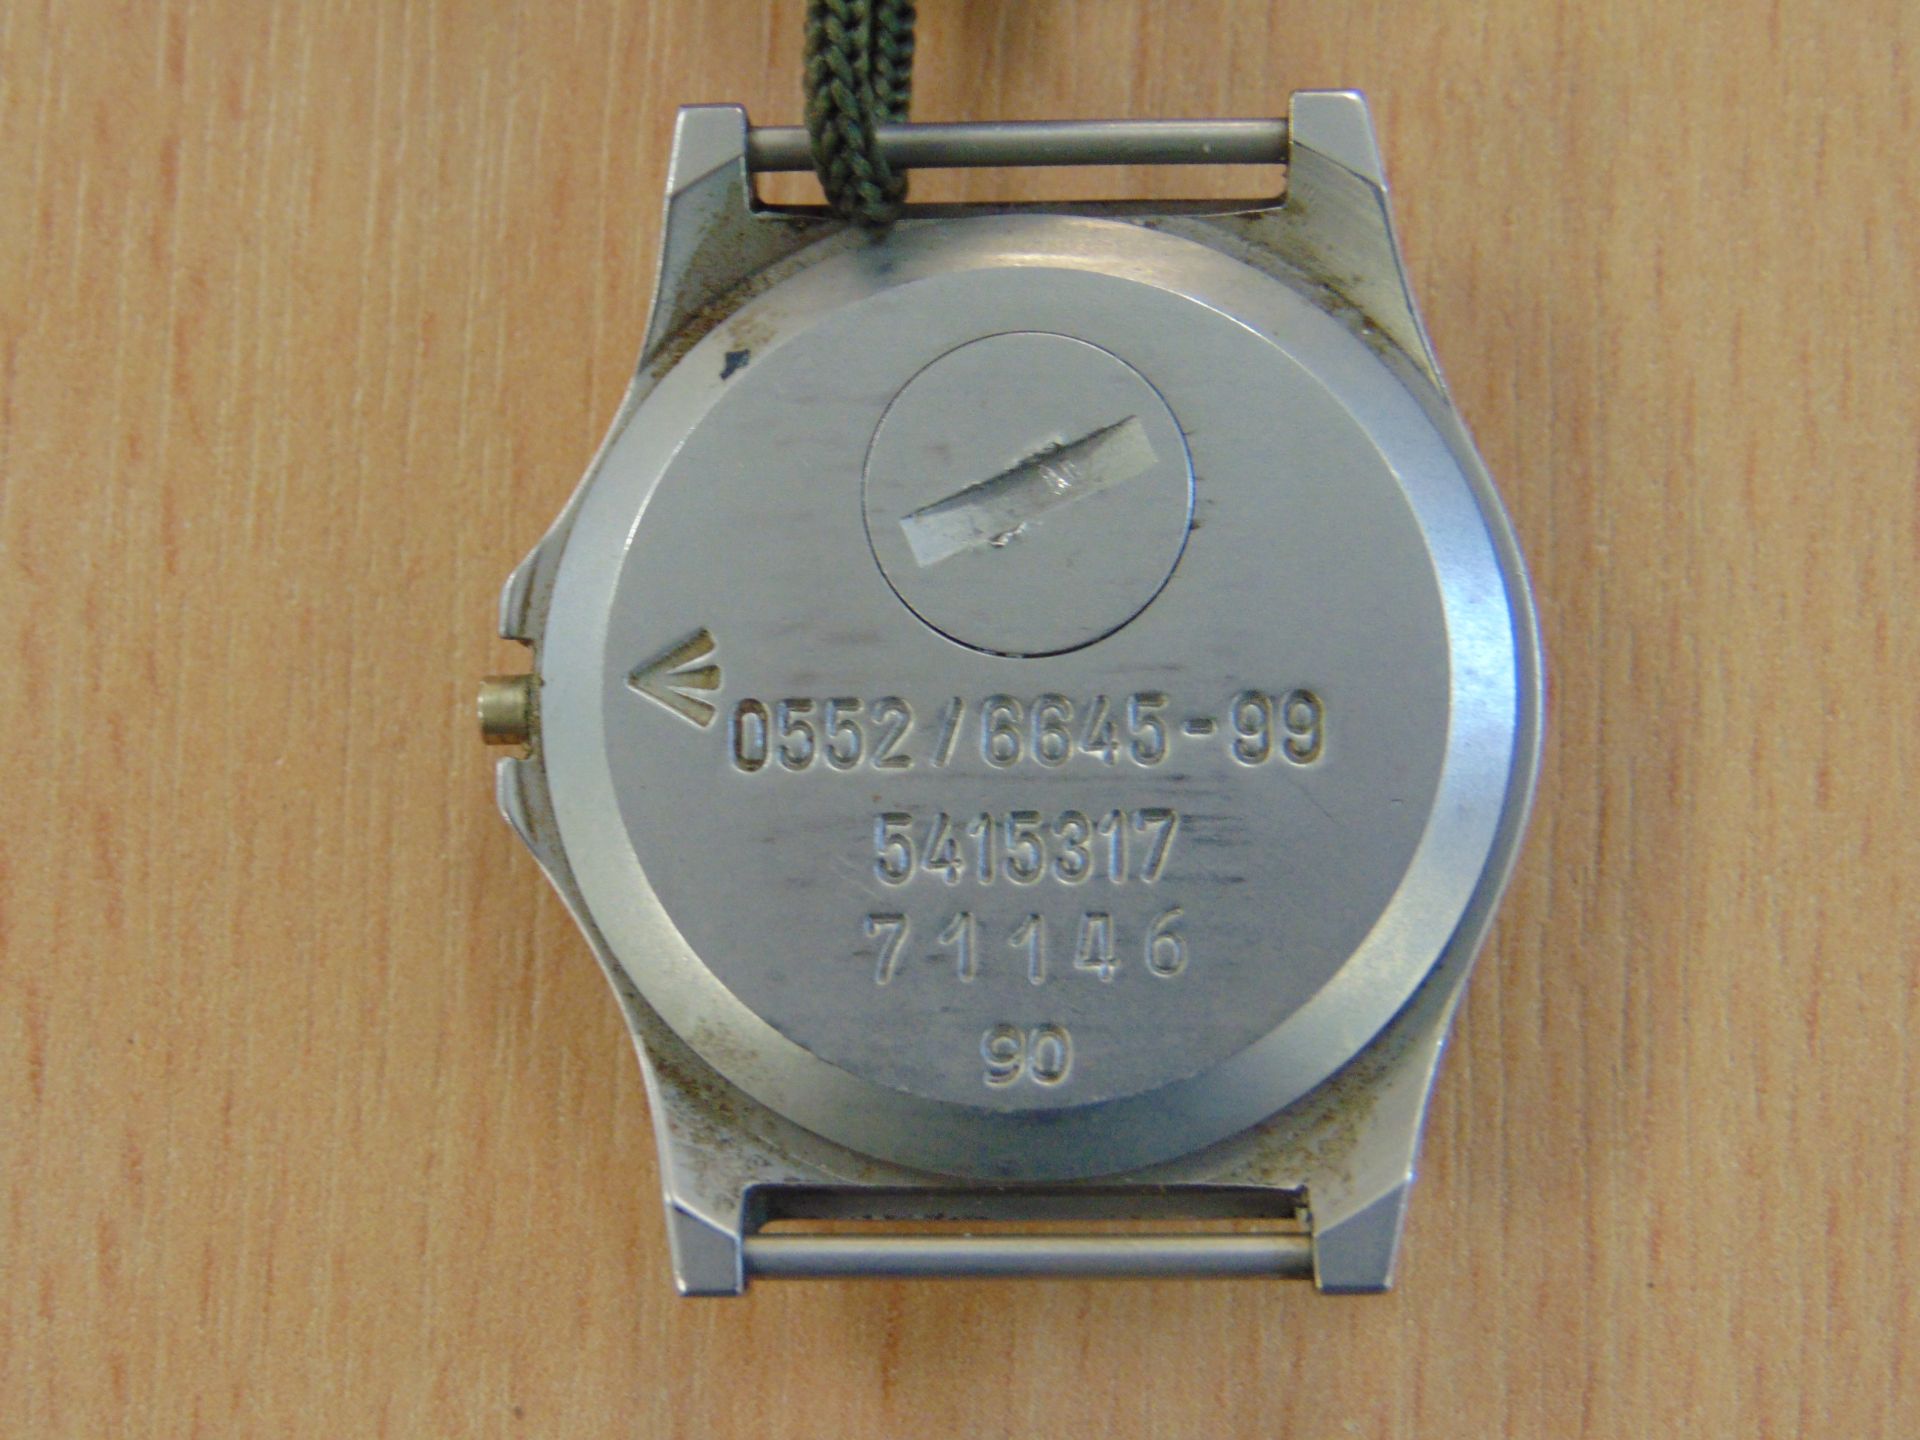 2X 0552 ROYAL MARINES ISSUE SERVICE WATCHES NATO MARKED DATED 1990 - Image 11 of 11